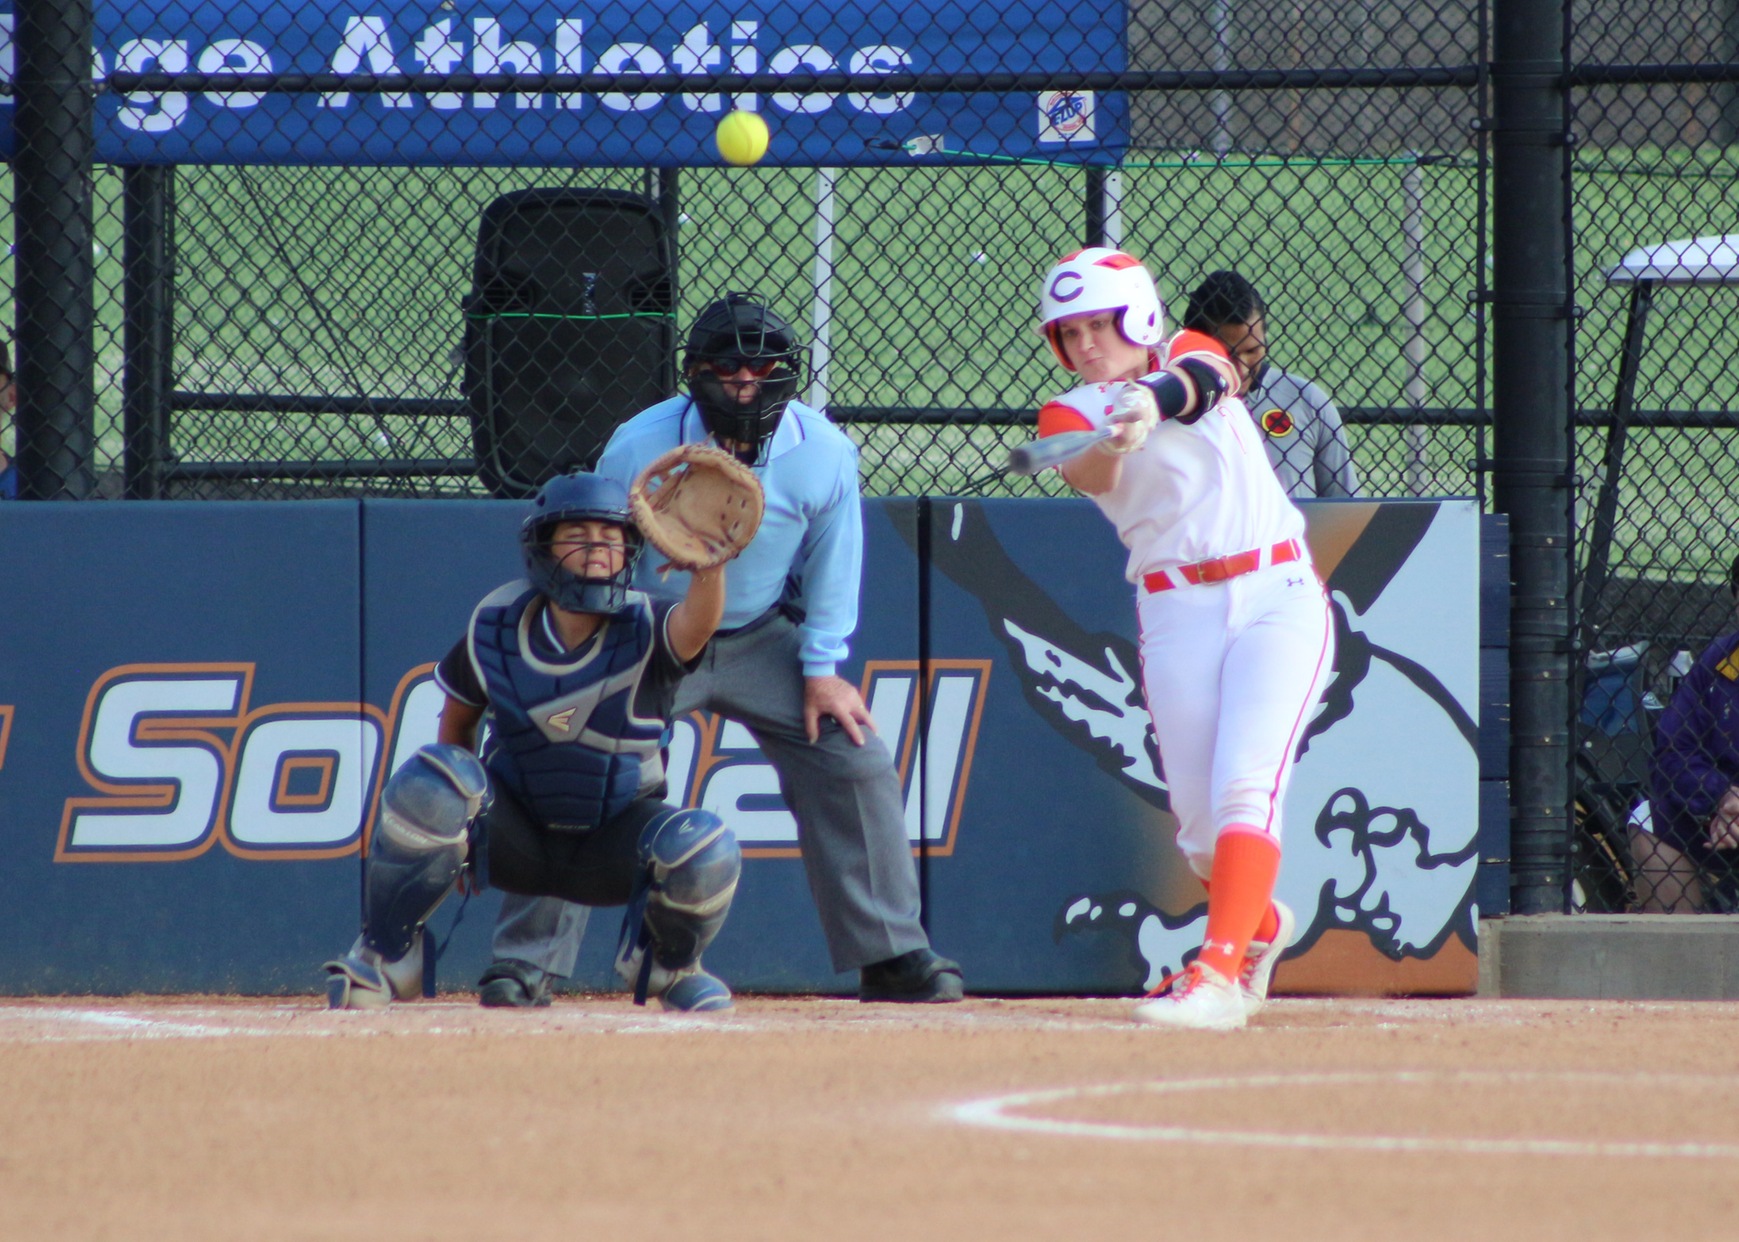 Megan Jones gets ahold of her pitch and drives a ball to deep right center. Image: Treyvon Watts-Hale